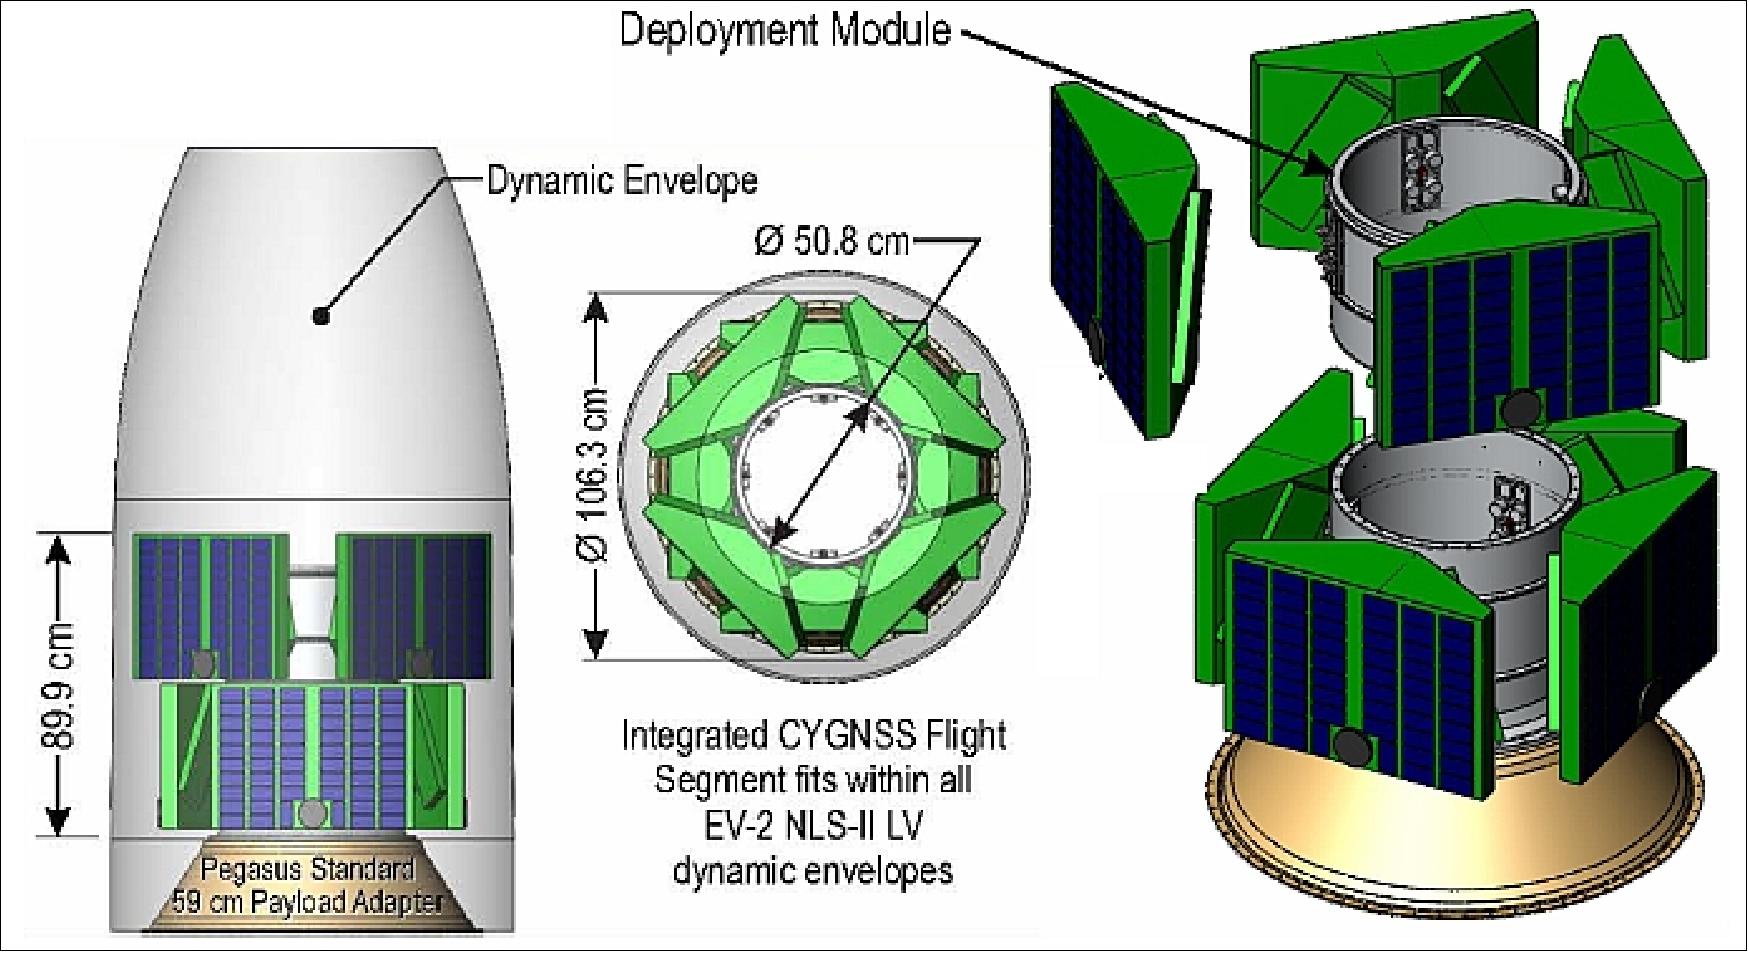 Figure 18: Illustration of the complete flight segment with Deployment Module (image credit: CYGNSS project)